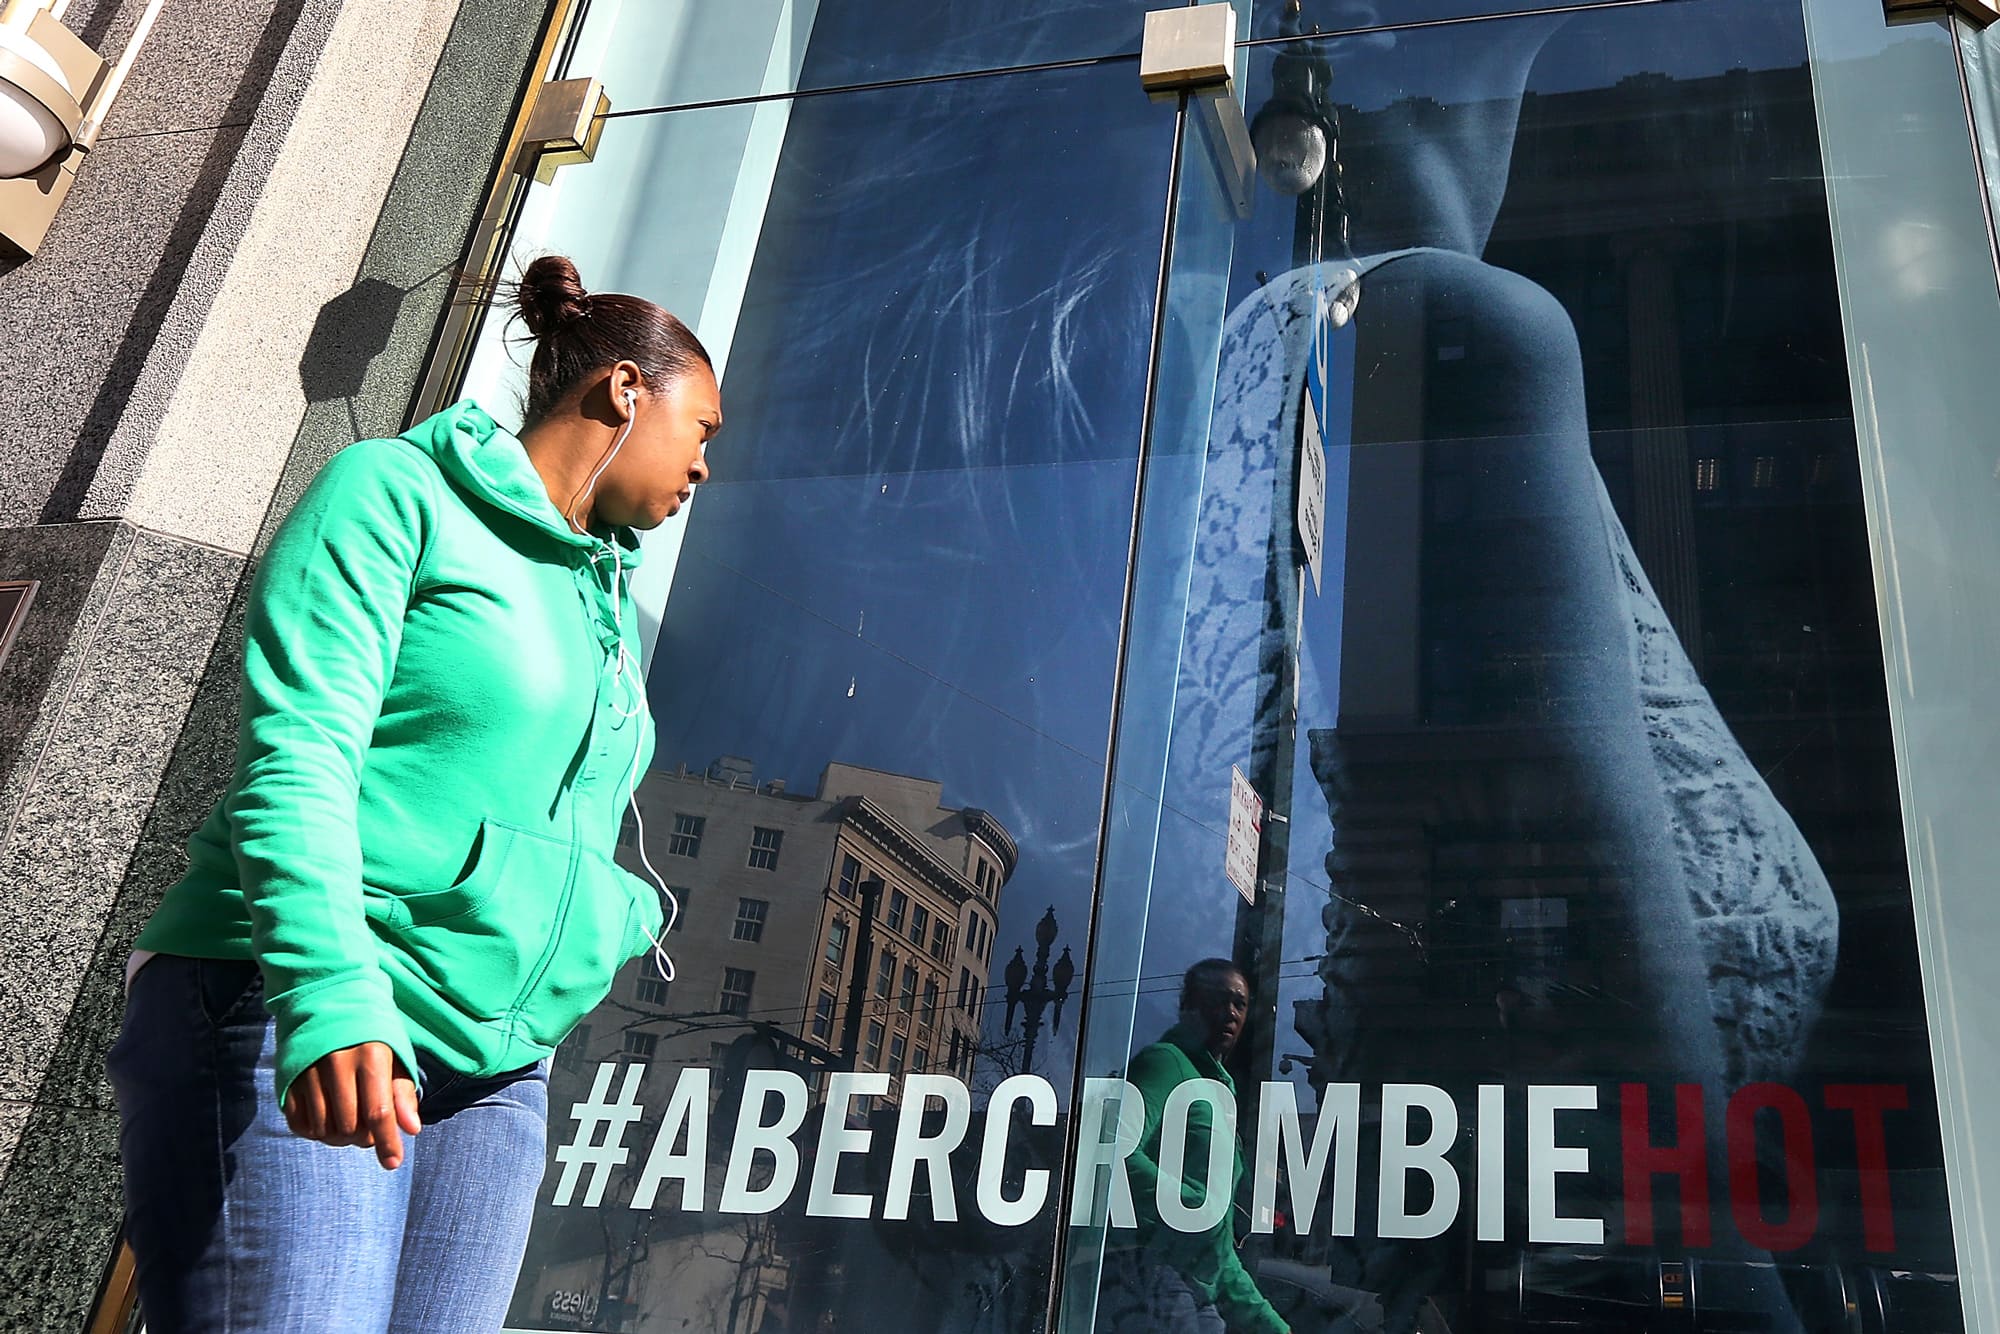 abercrombie and fitch near me now